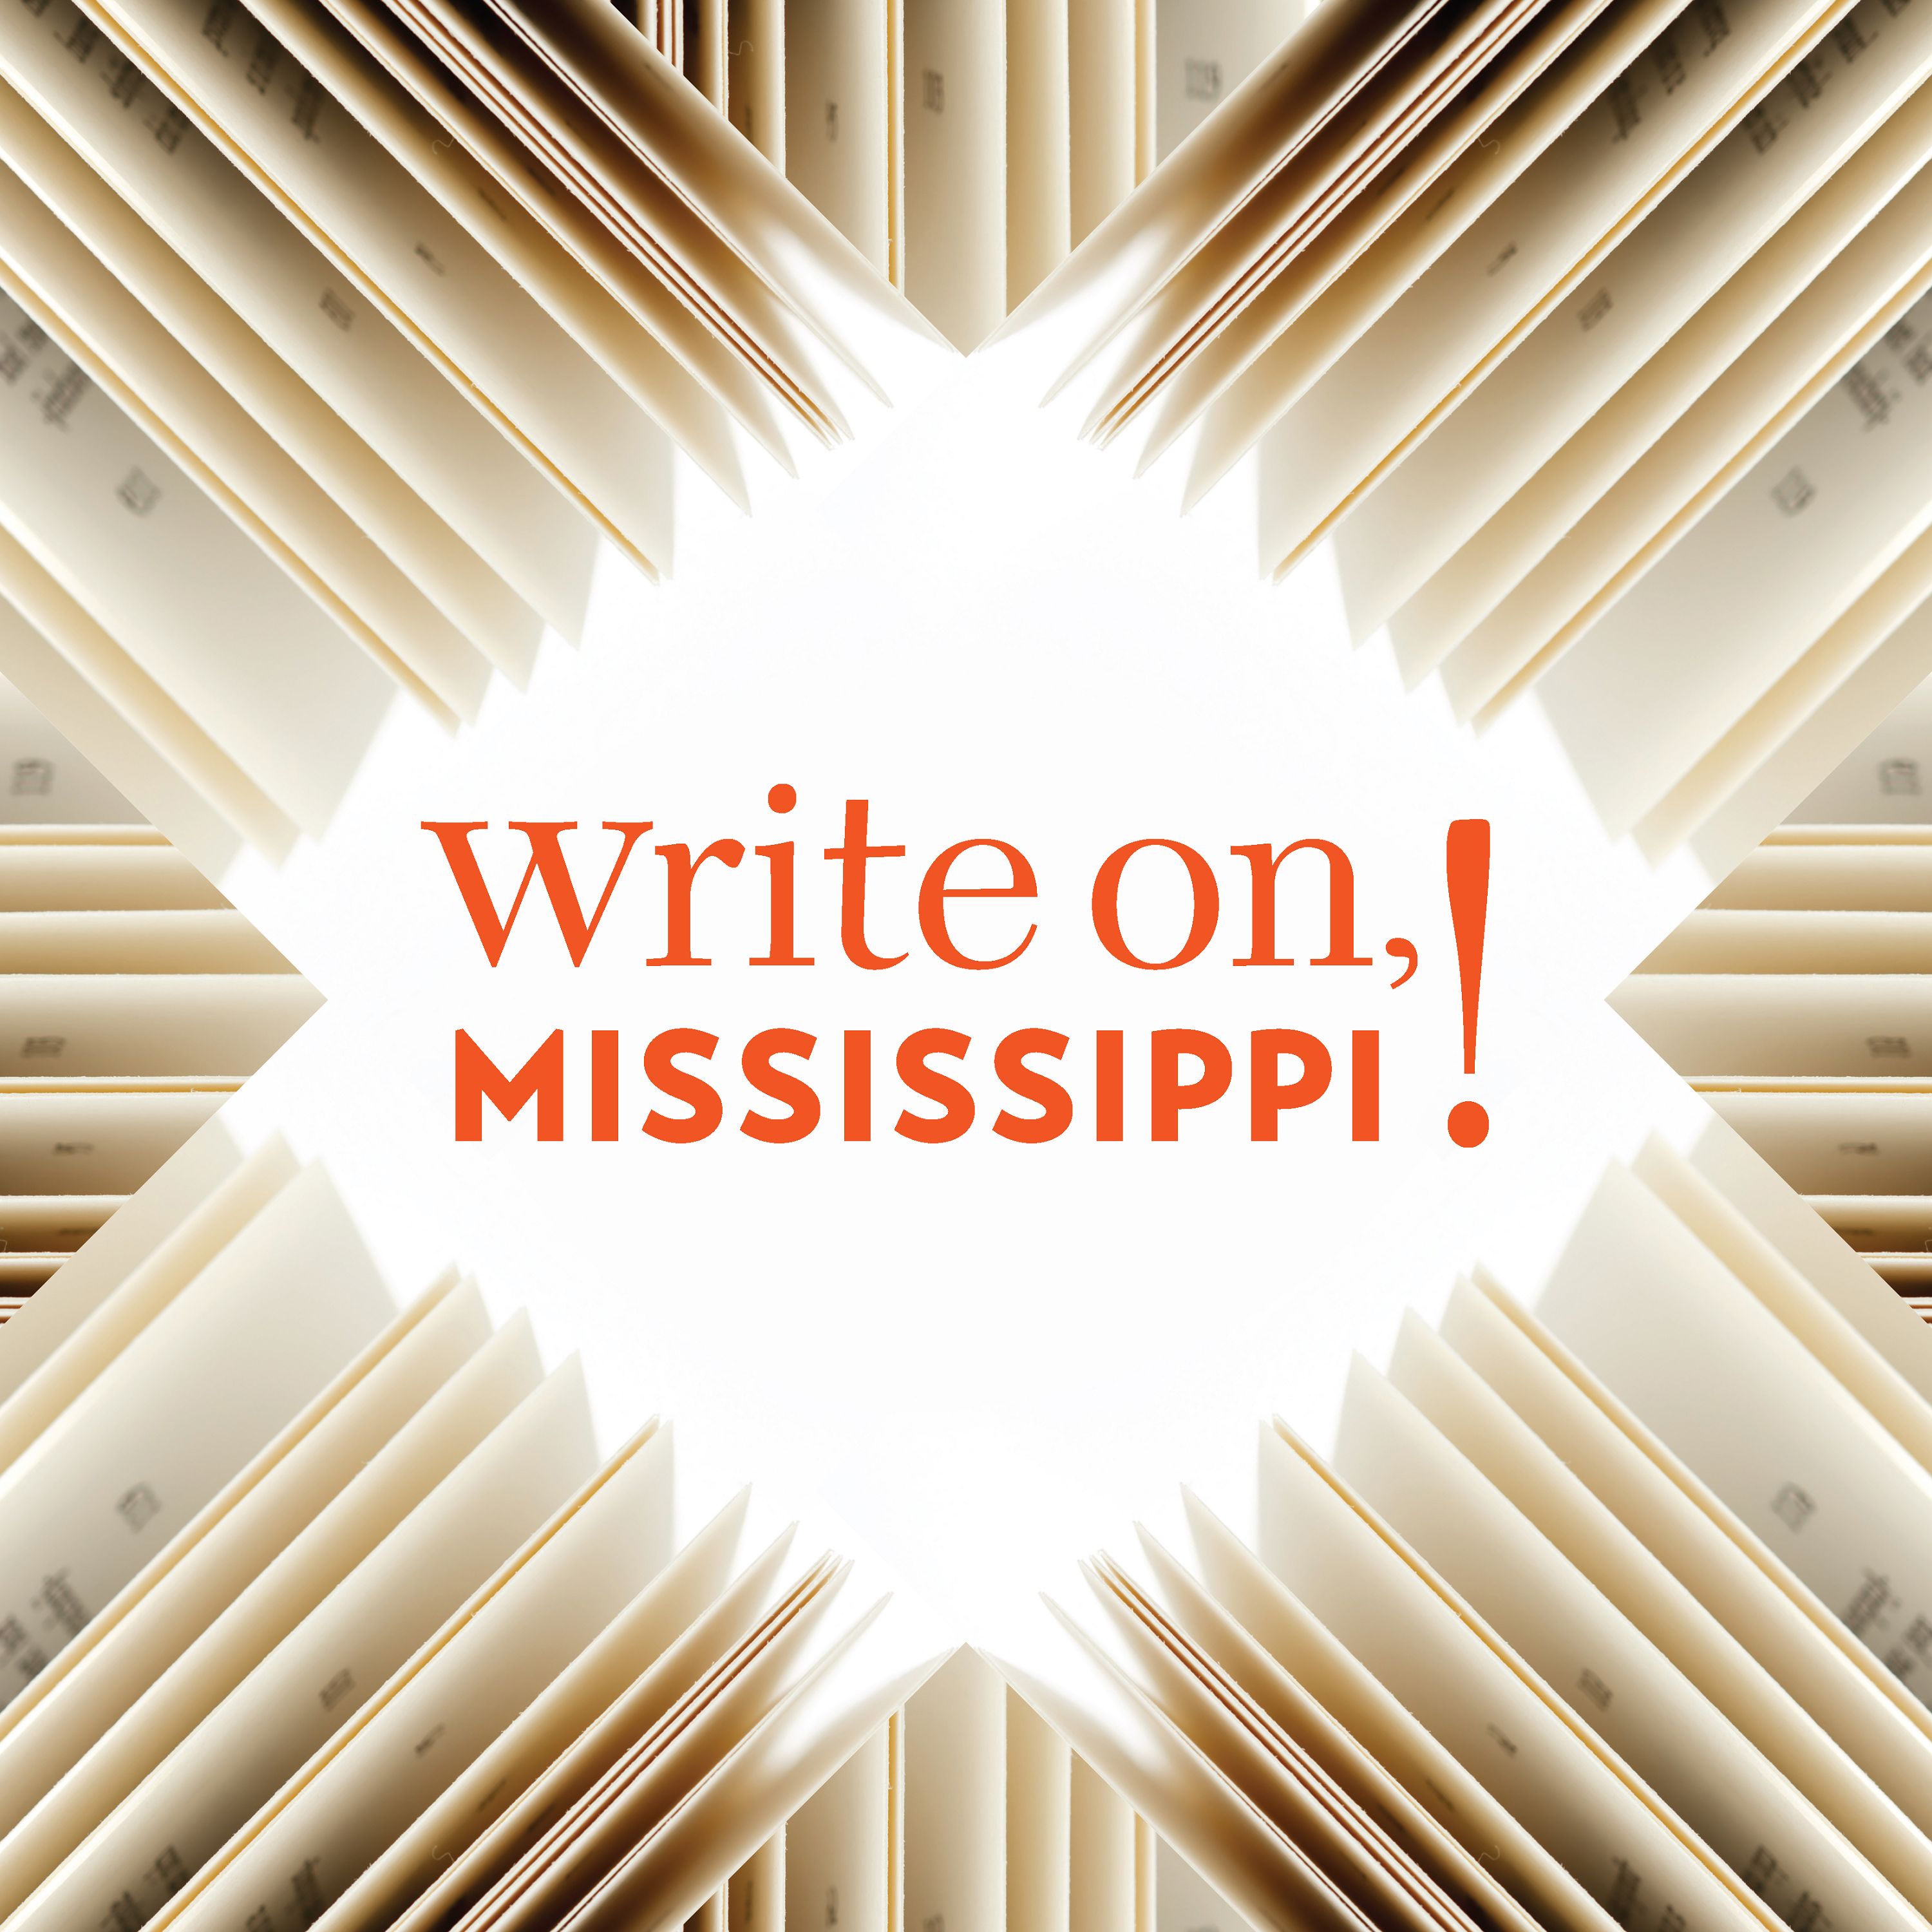 Coming Soon: Write on, Mississippi!